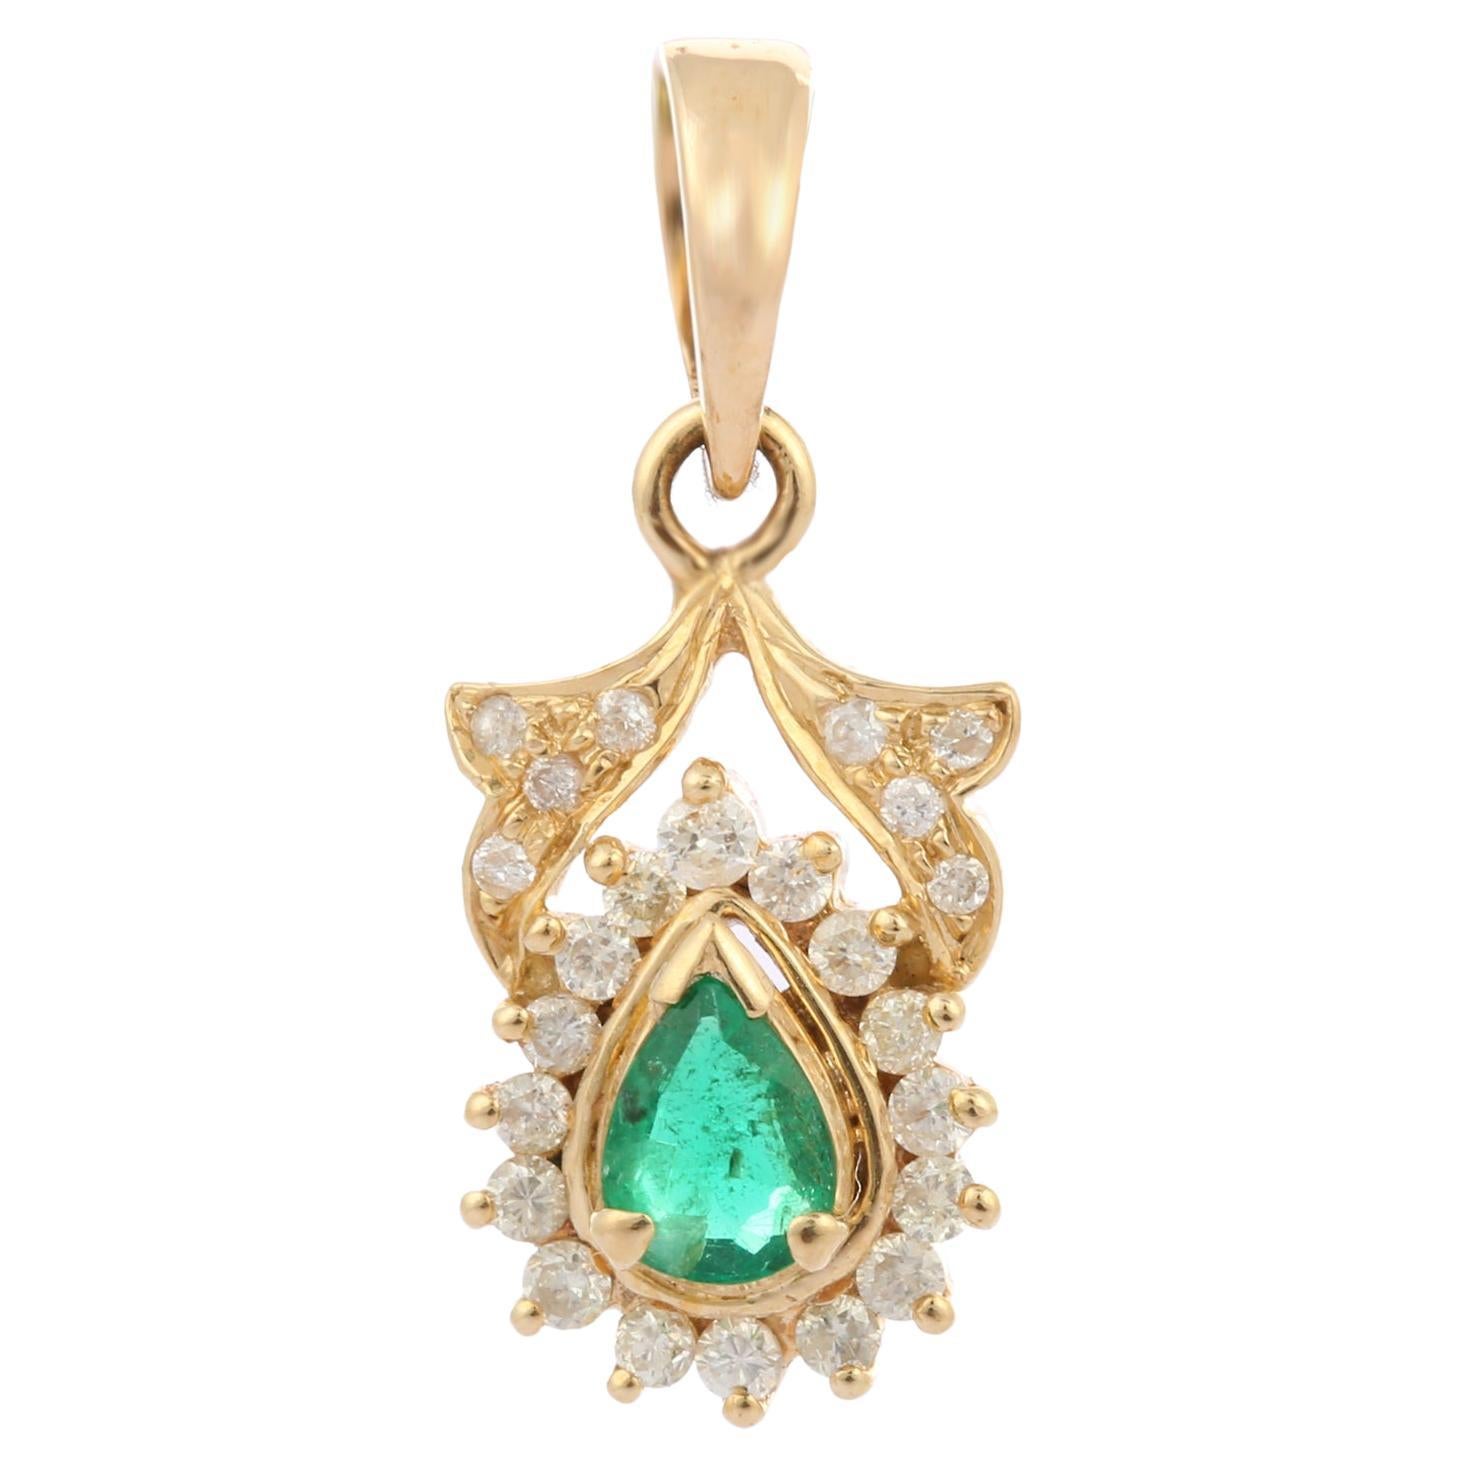 Pear Cut Emerald Diamond Pendant 14k Yellow Gold, Bride To Be Gift For Women